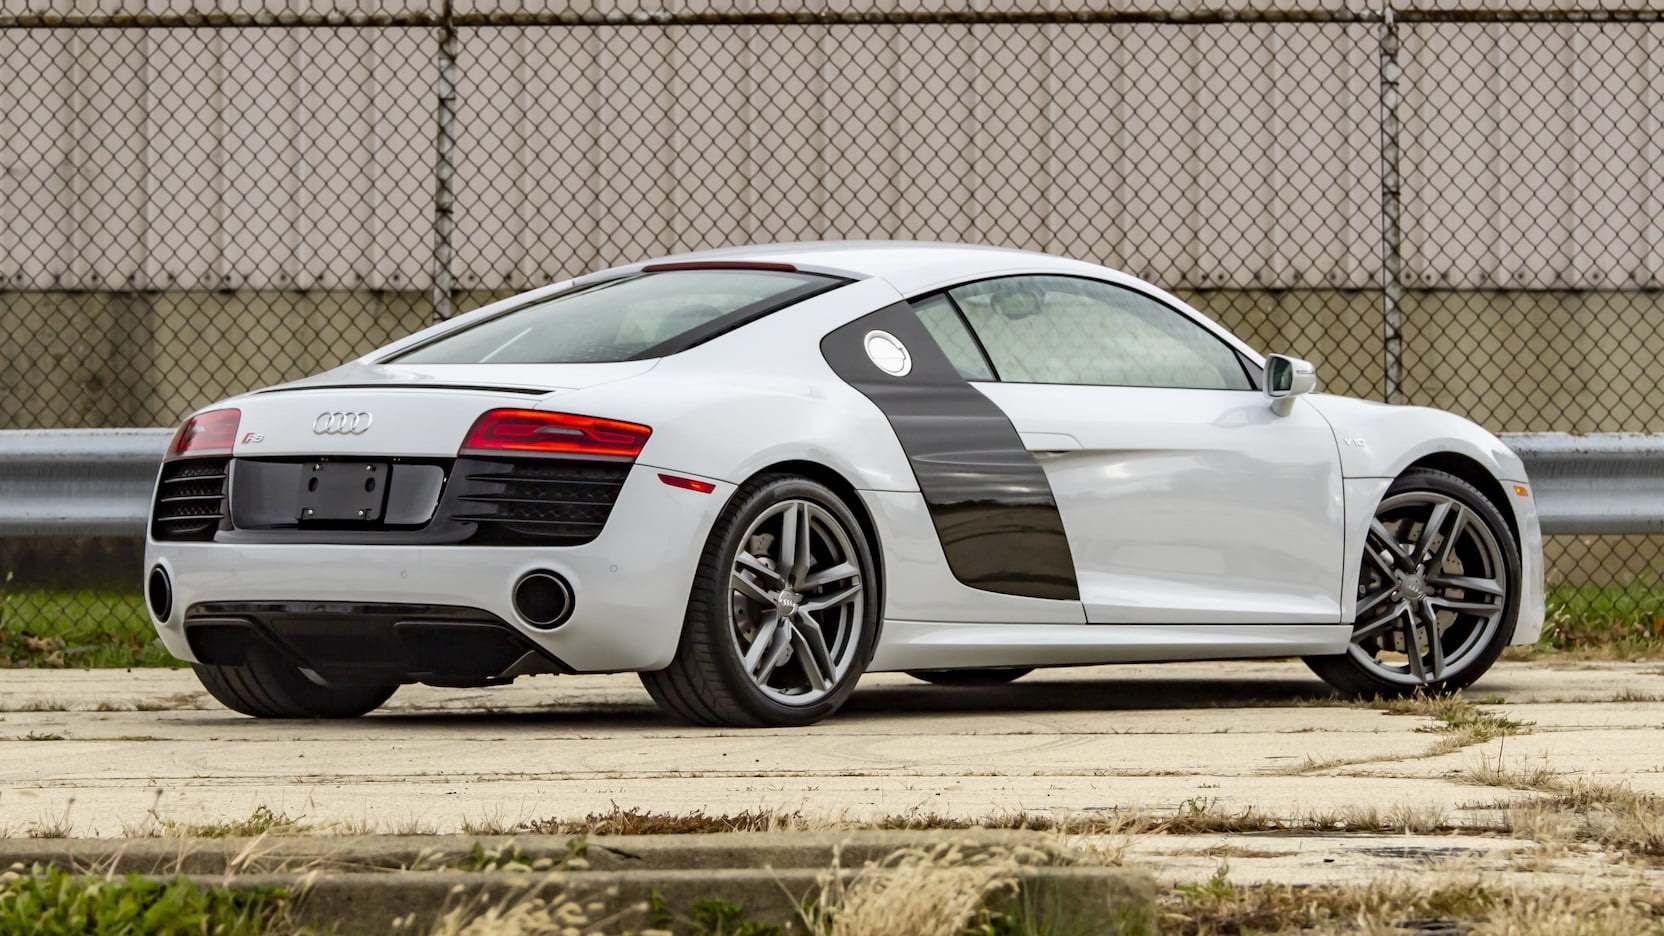 White Audi R8 parked outside near chain-link fence